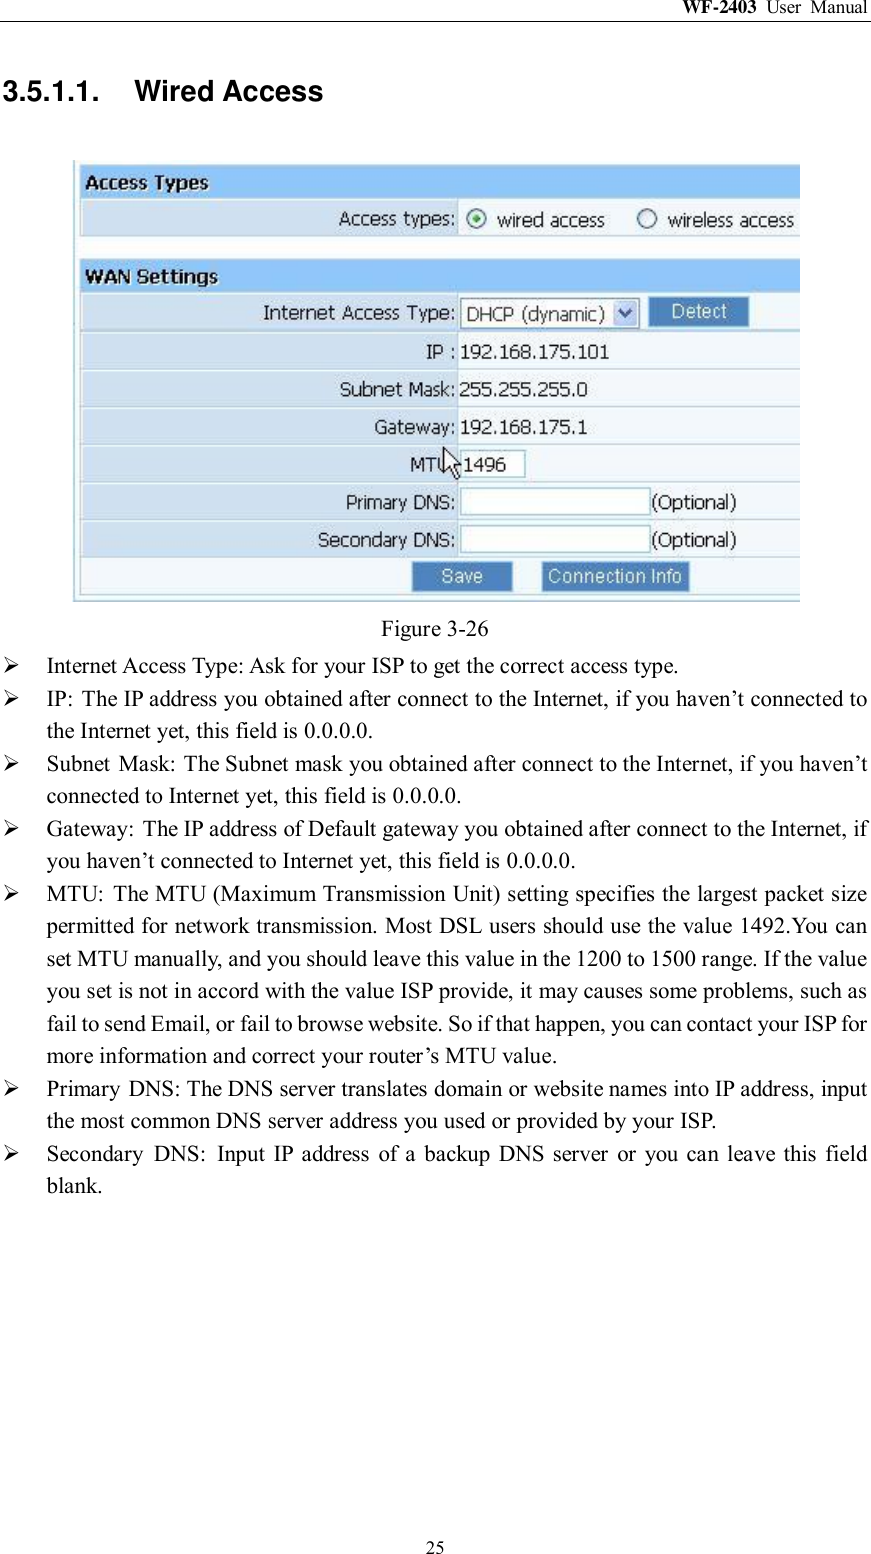 WF-2403  User  Manual  25 3.5.1.1.  Wired Access  Figure 3-26  Internet Access Type: Ask for your ISP to get the correct access type.  IP:  The IP address you obtained after connect to the Internet, if you haven‟t connected to the Internet yet, this field is 0.0.0.0.  Subnet  Mask: The Subnet mask you obtained after connect to the Internet, if you haven‟t connected to Internet yet, this field is 0.0.0.0.  Gateway:  The IP address of Default gateway you obtained after connect to the Internet, if you haven‟t connected to Internet yet, this field is 0.0.0.0.  MTU:  The MTU (Maximum Transmission Unit) setting specifies the largest packet size permitted for network transmission. Most DSL users should use the value 1492.You can set MTU manually, and you should leave this value in the 1200 to 1500 range. If the value you set is not in accord with the value ISP provide, it may causes some problems, such as fail to send Email, or fail to browse website. So if that happen, you can contact your ISP for more information and correct your router‟s MTU value.  Primary  DNS: The DNS server translates domain or website names into IP address, input the most common DNS server address you used or provided by your ISP.  Secondary  DNS:  Input IP  address  of  a  backup DNS server  or  you  can leave this  field blank. 